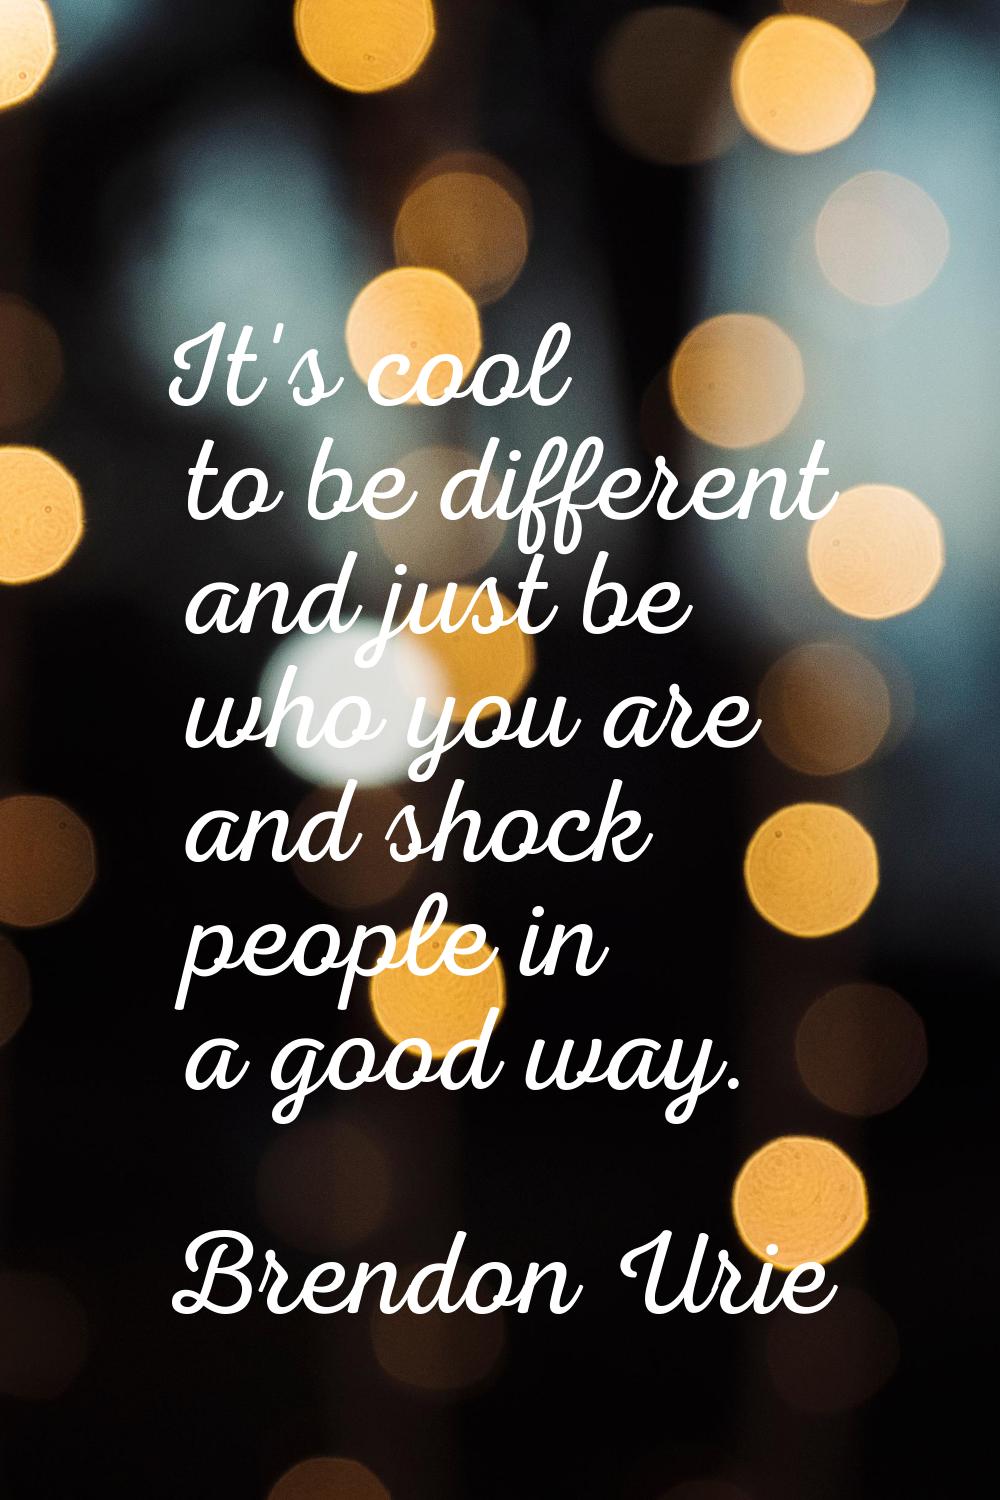 It's cool to be different and just be who you are and shock people in a good way.